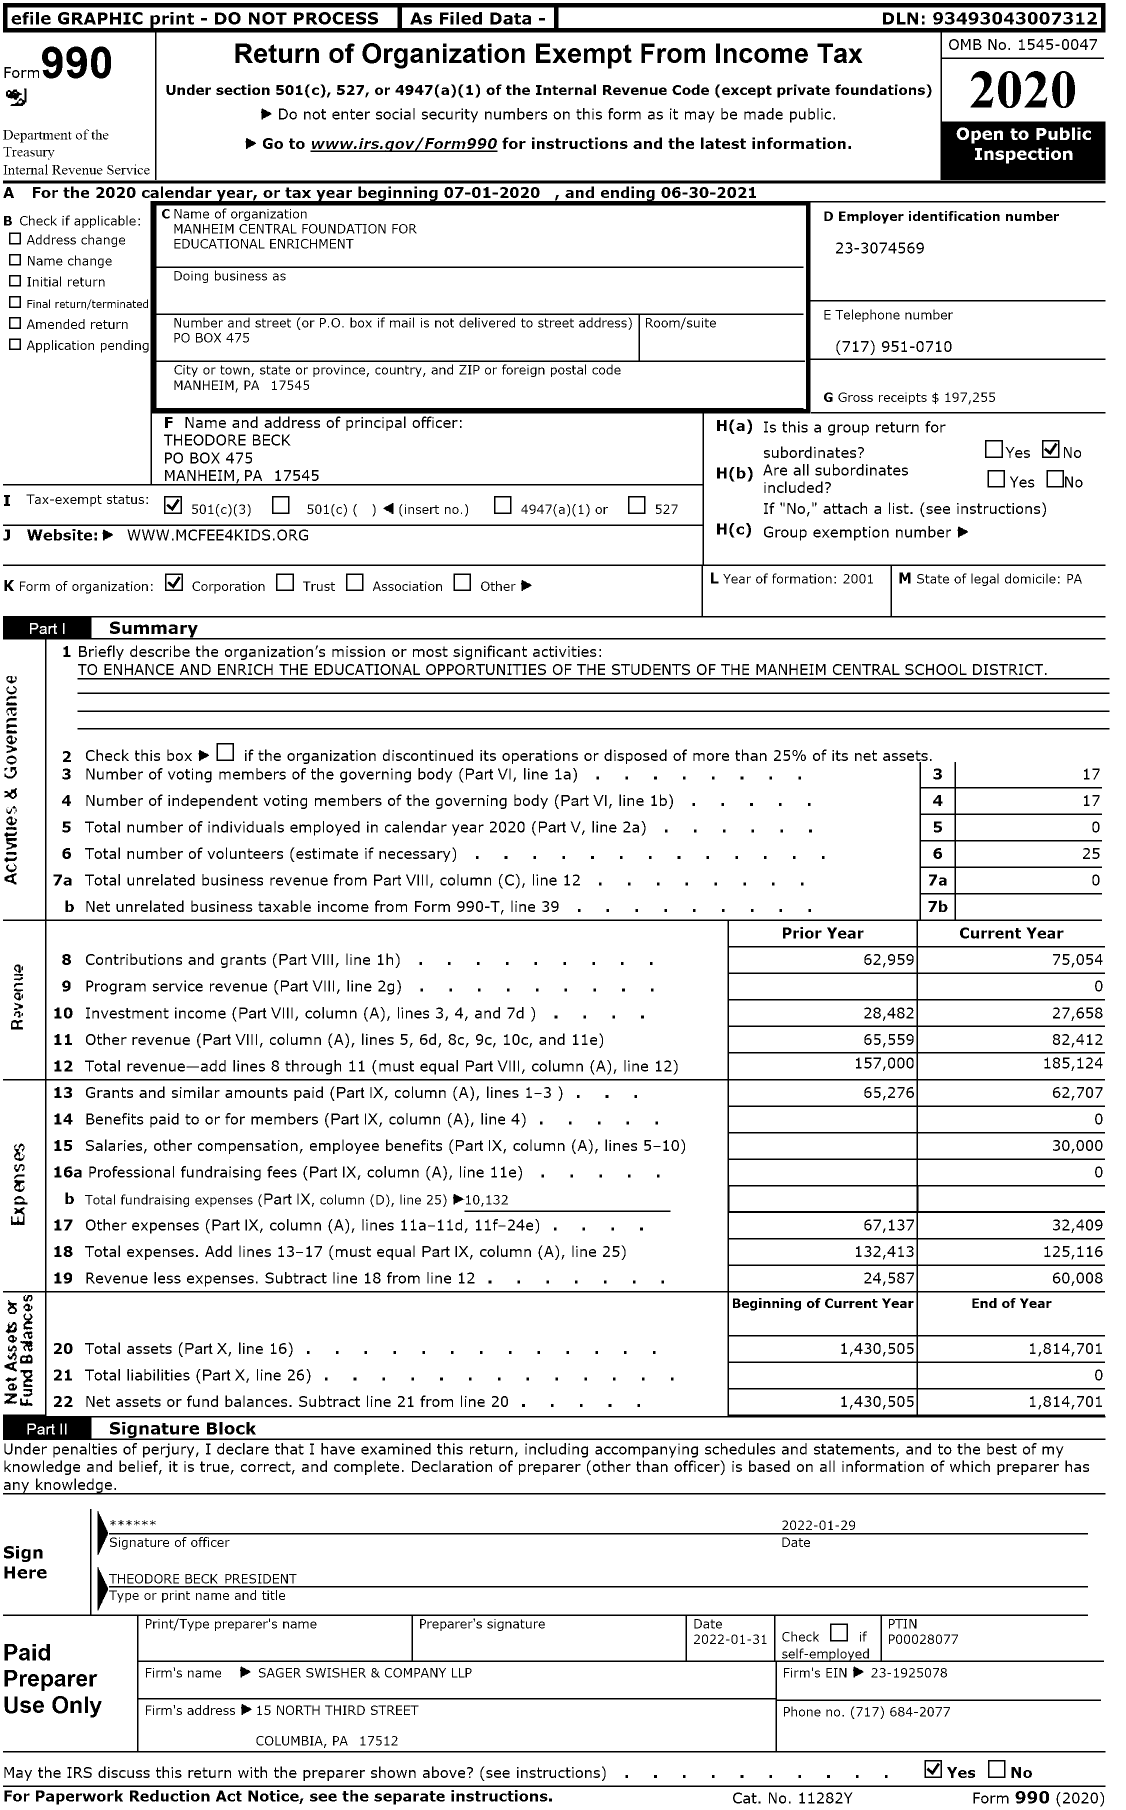 Image of first page of 2020 Form 990 for Manheim Central Foundation for Educational Enrichment